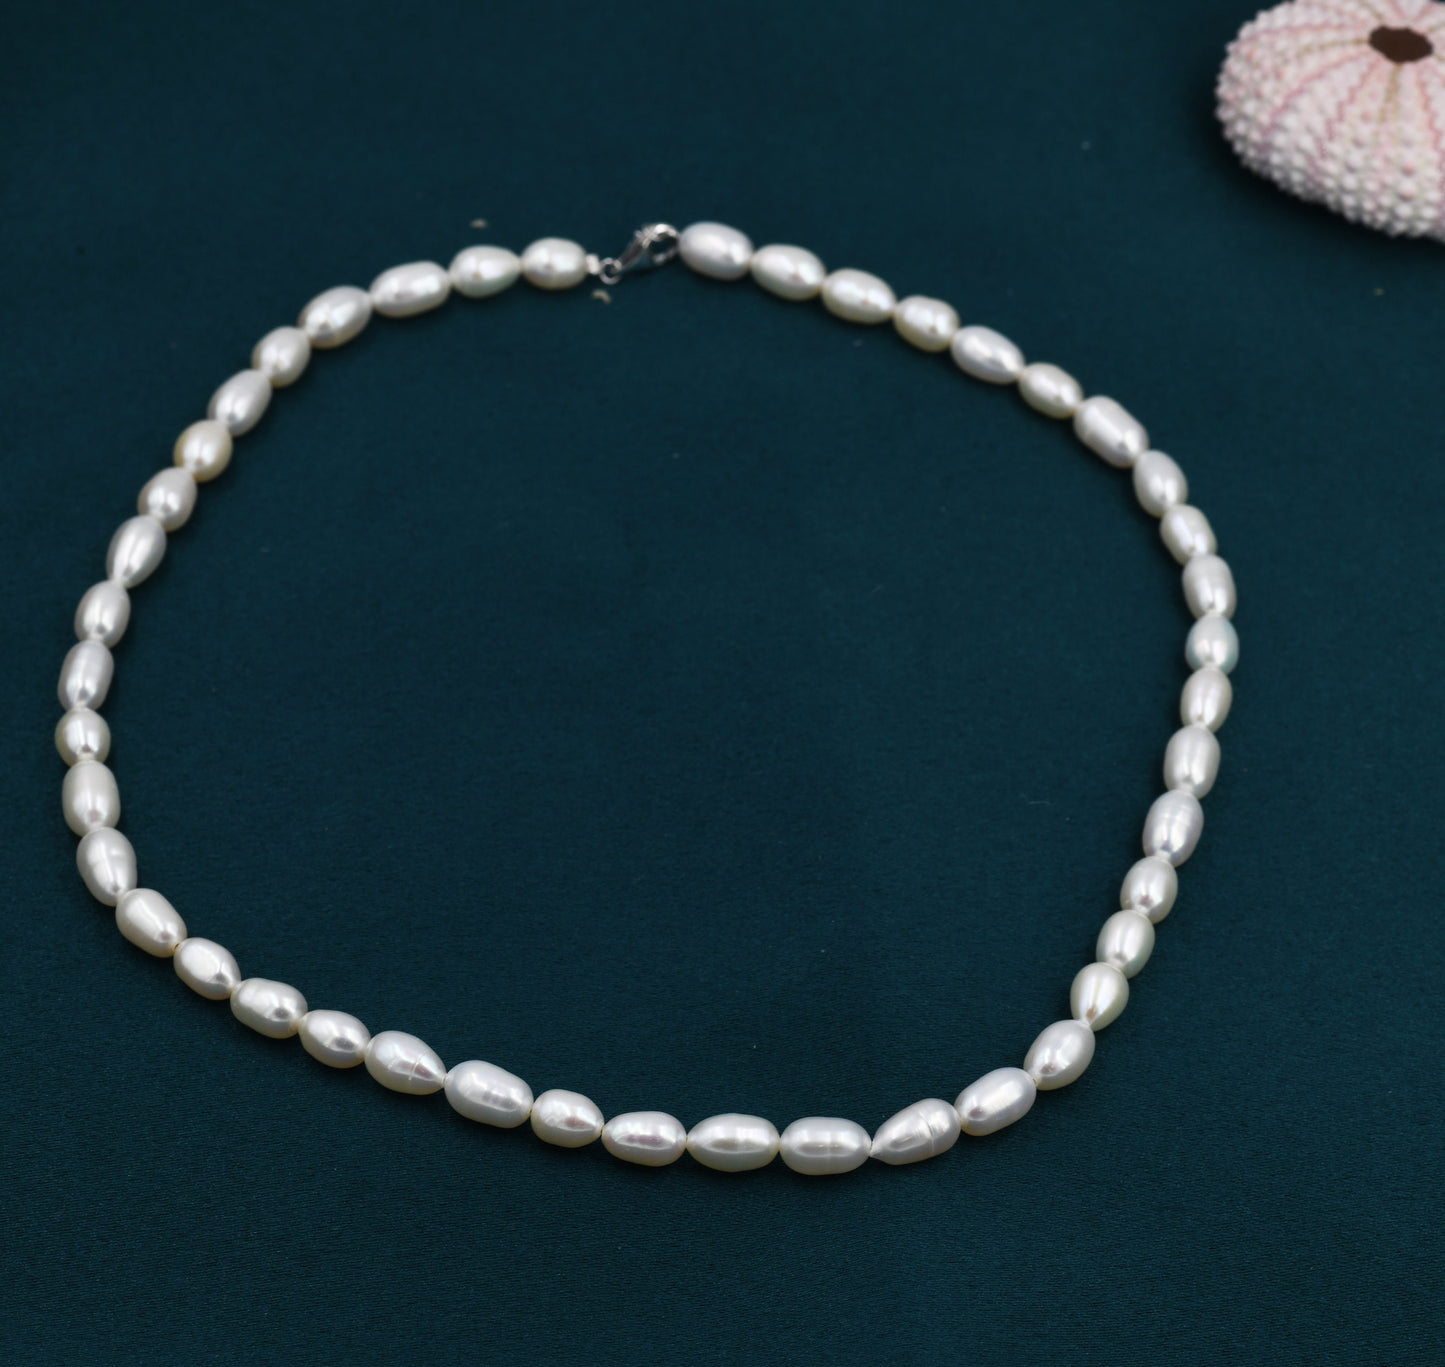 Genuine Freshwater Pearl Necklace in Sterling Silver, Slightly Irregular Shape Oval Round Fresh Water Pearl Necklace, Baroque Pearl Necklace